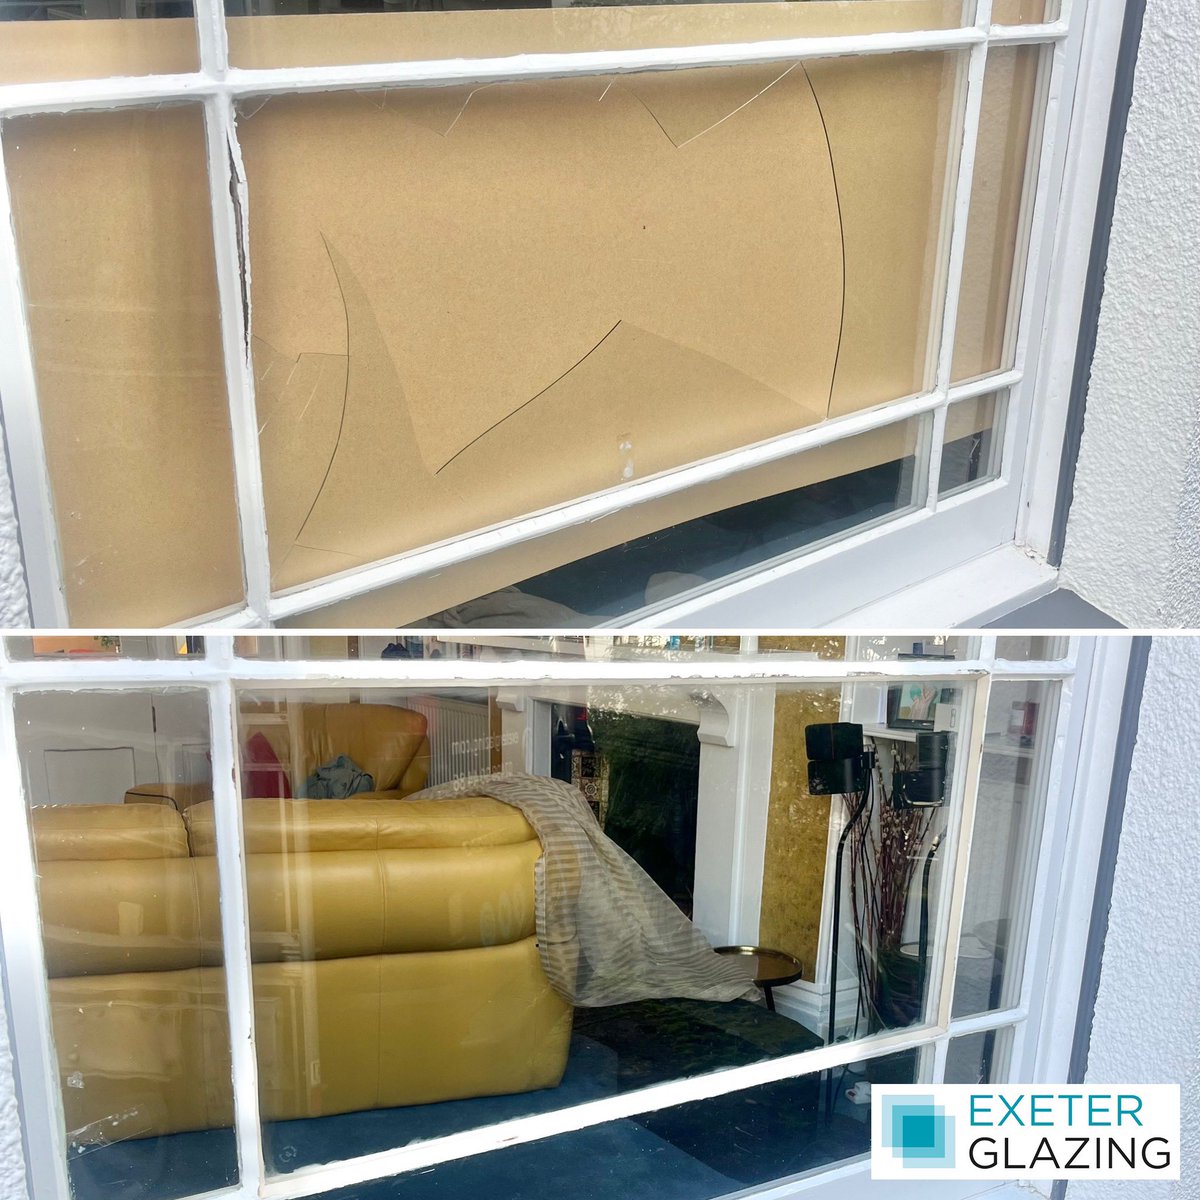 A broken pane of single glazing that we replaced in this wooden frame recently, the new pane is toughened safety glass and finished off with putty.

#glassreplacement #singleglazing #toughened #safety #putty #glass #glazing #glazier #exeter #exeterglazing #exeterbusiness